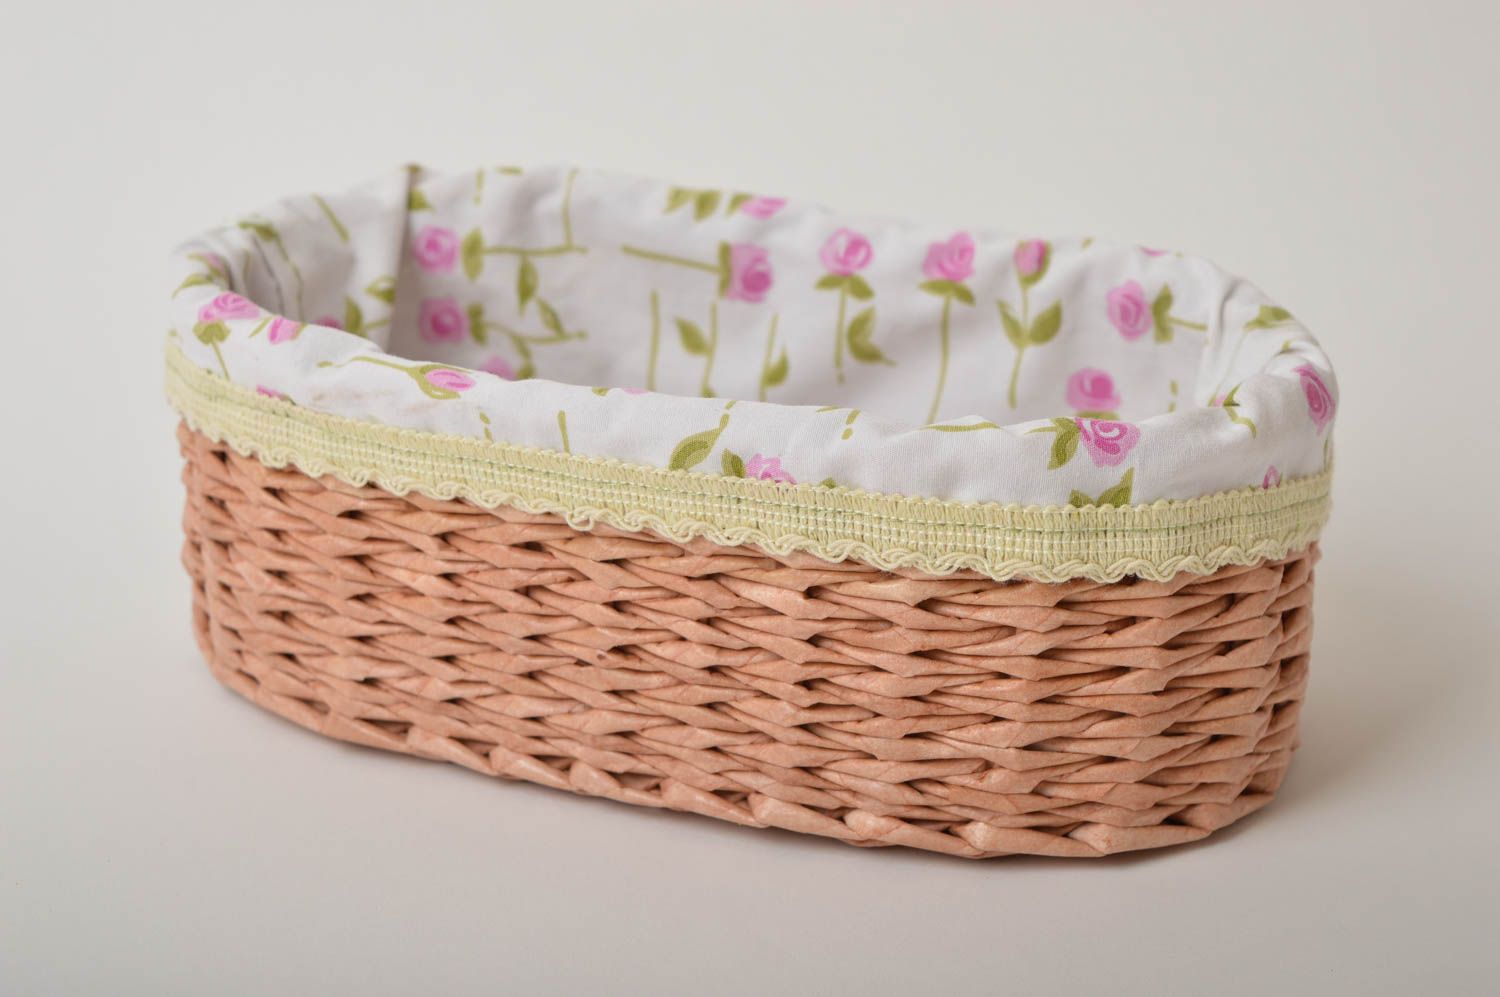 Decorative basket home decor handmade gifts paper basket woven basket cool gifts photo 2